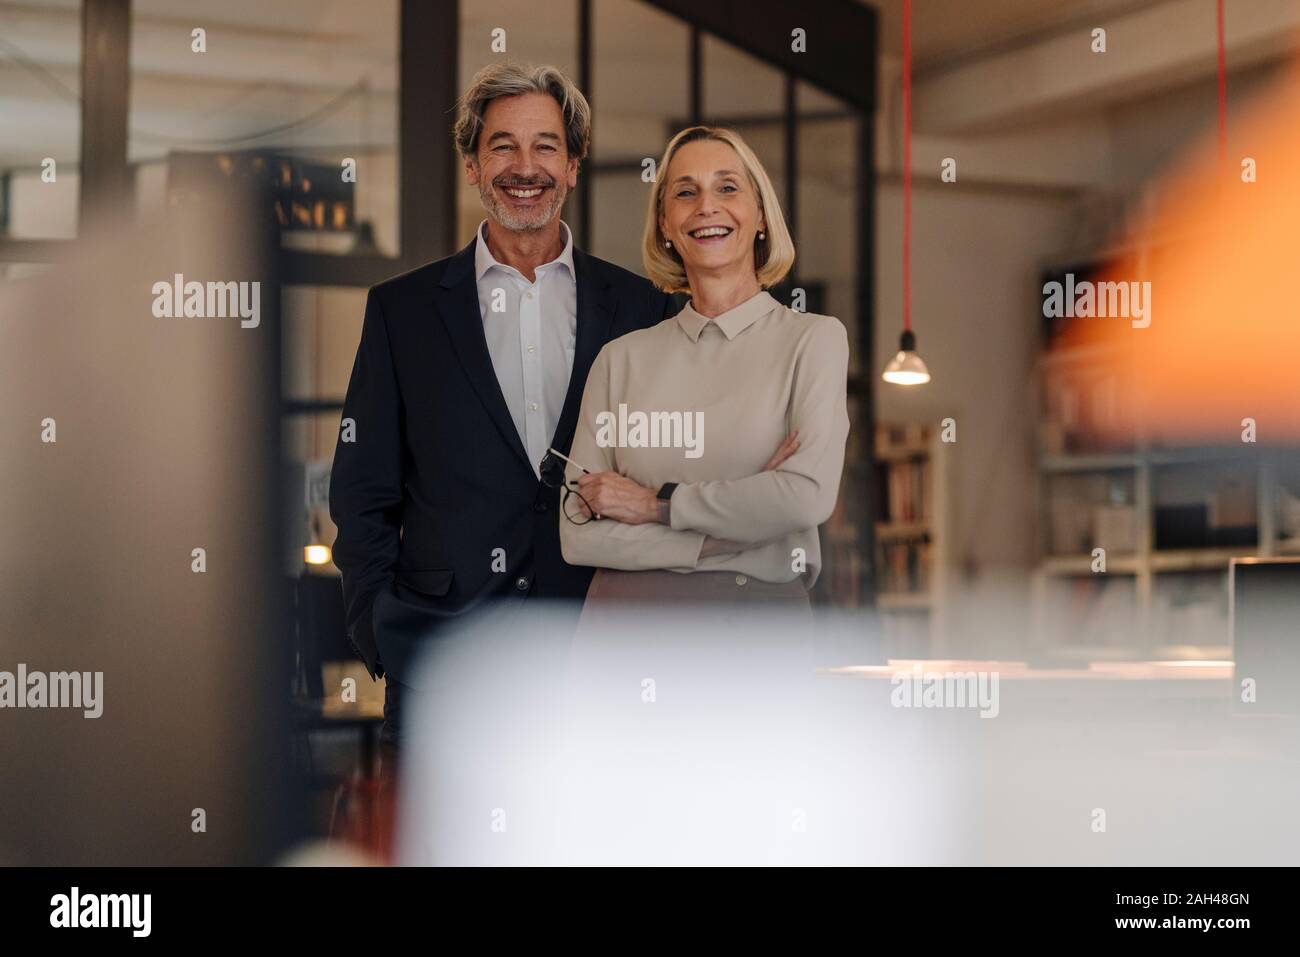 Le Portrait of smiling businessman and businesswoman in office Banque D'Images